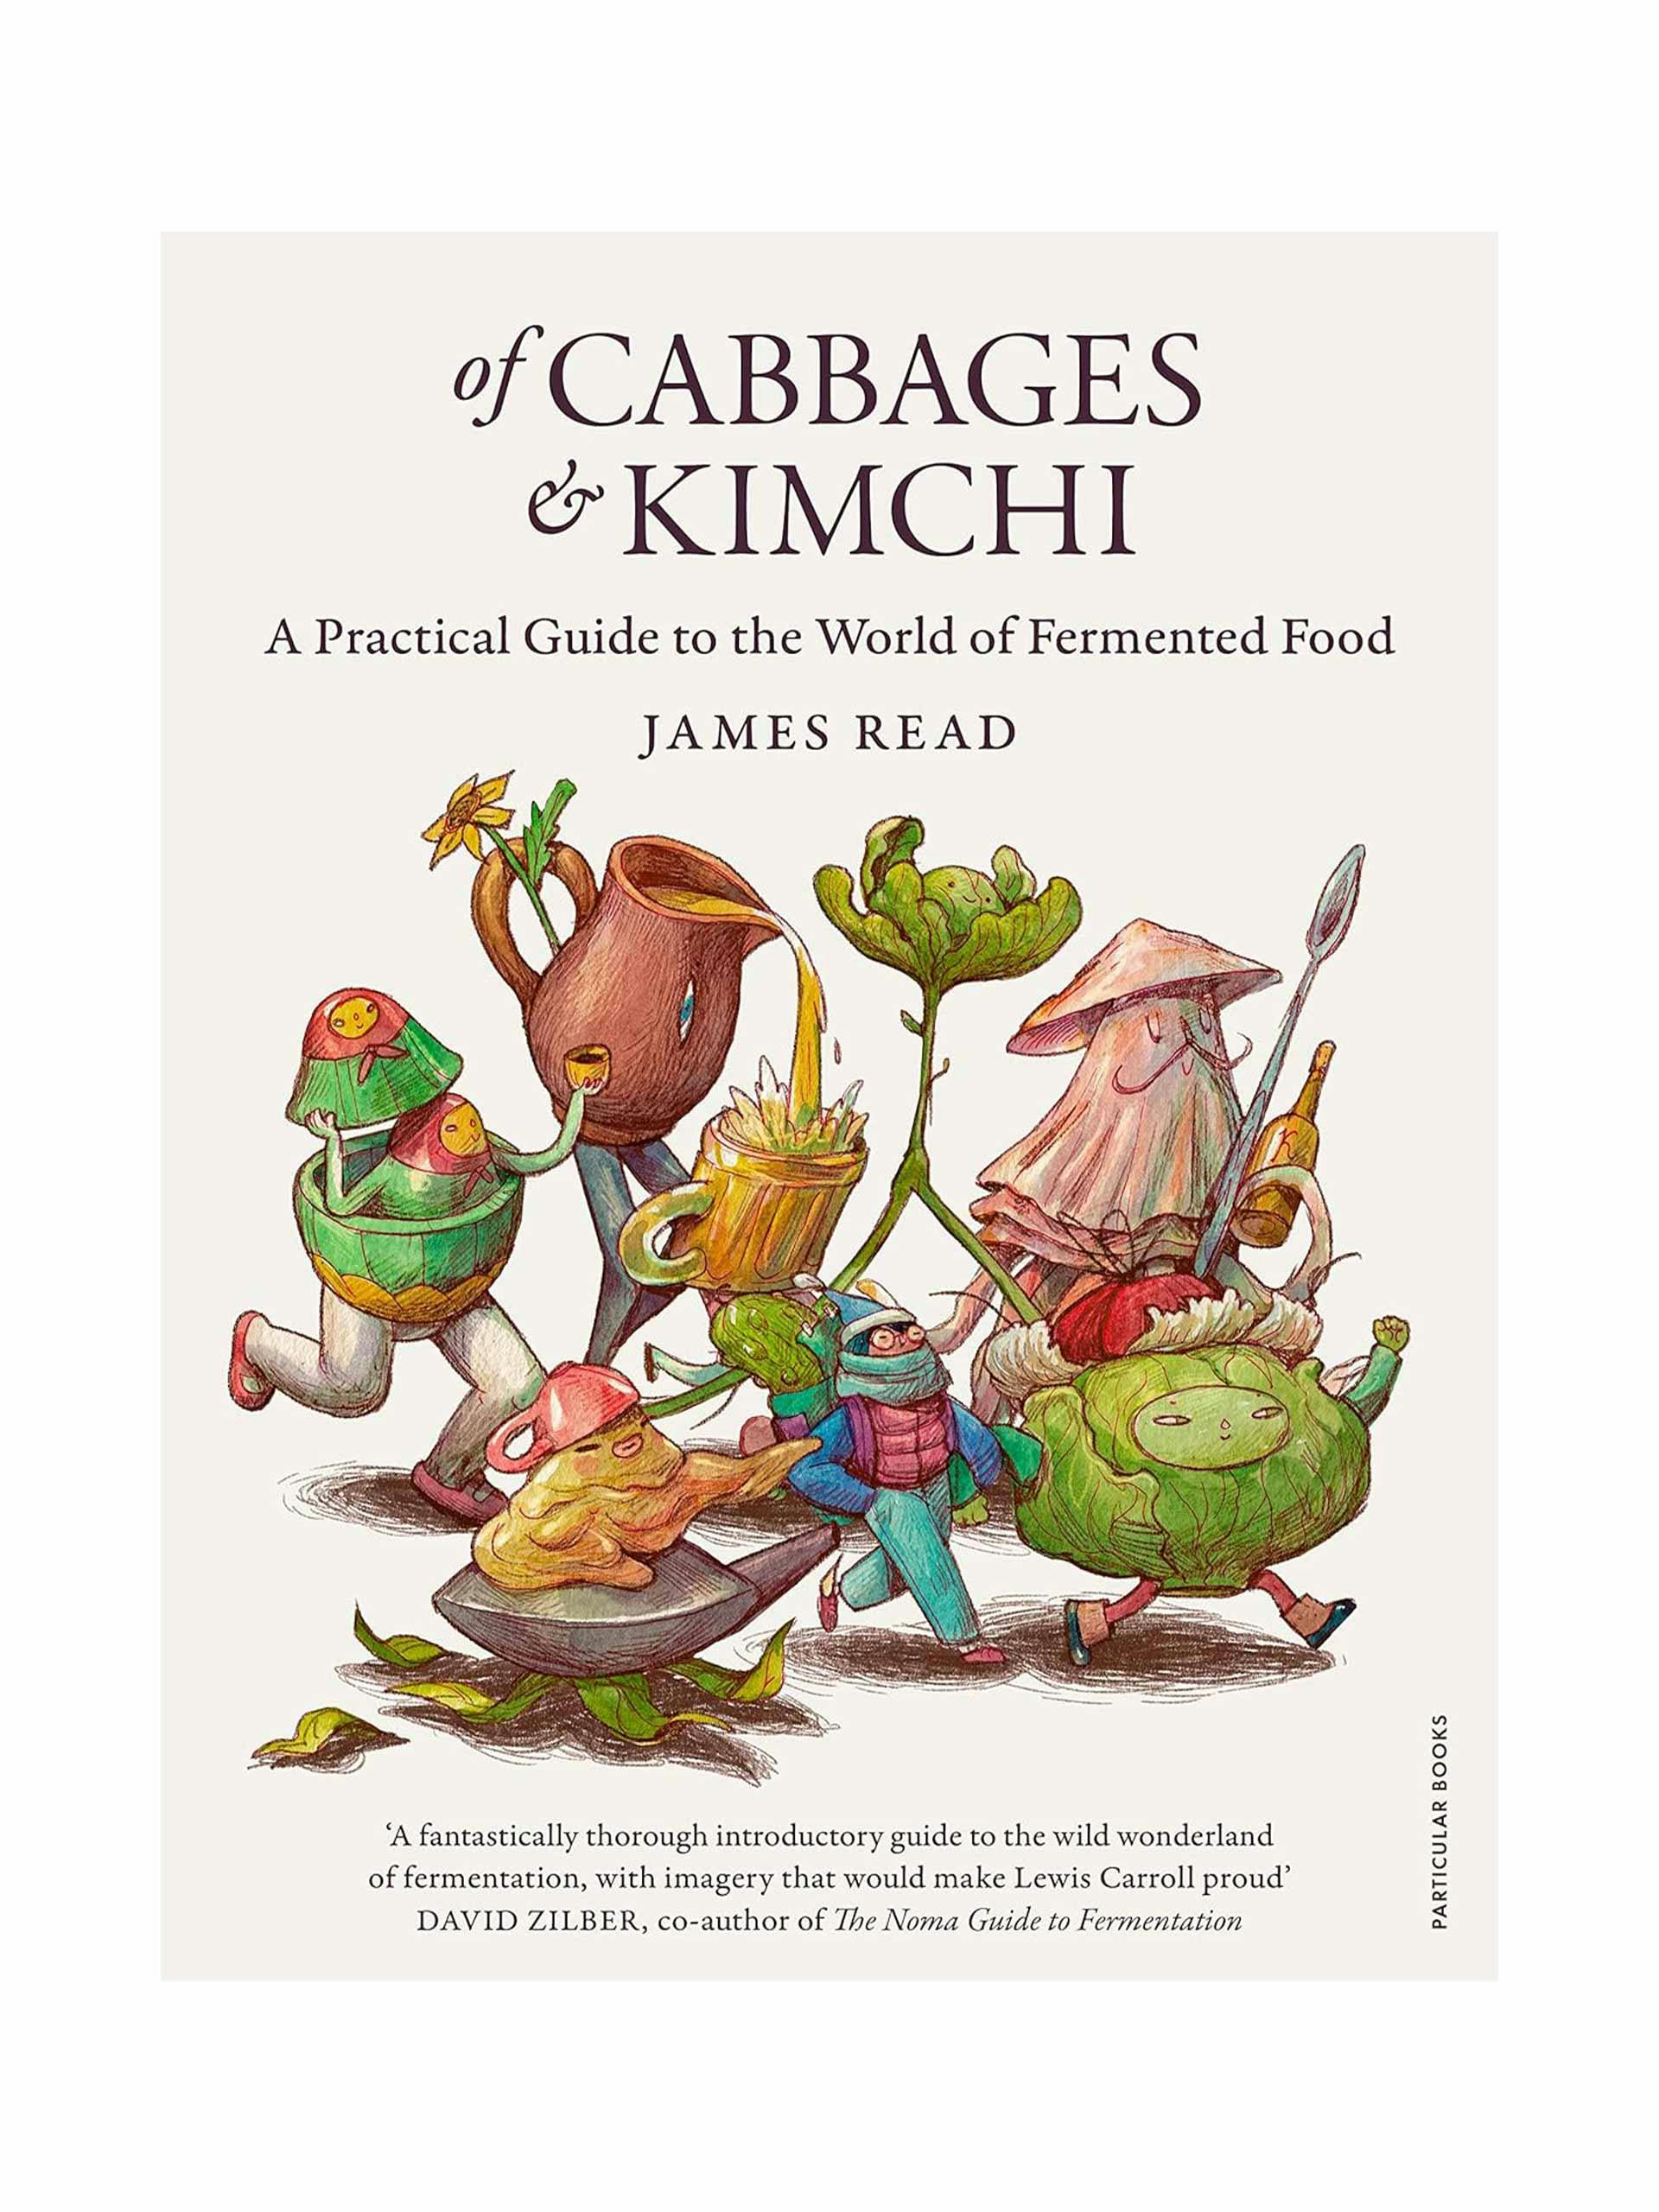 Of cabbages and kimchi: A practical guide to the world of fermented food